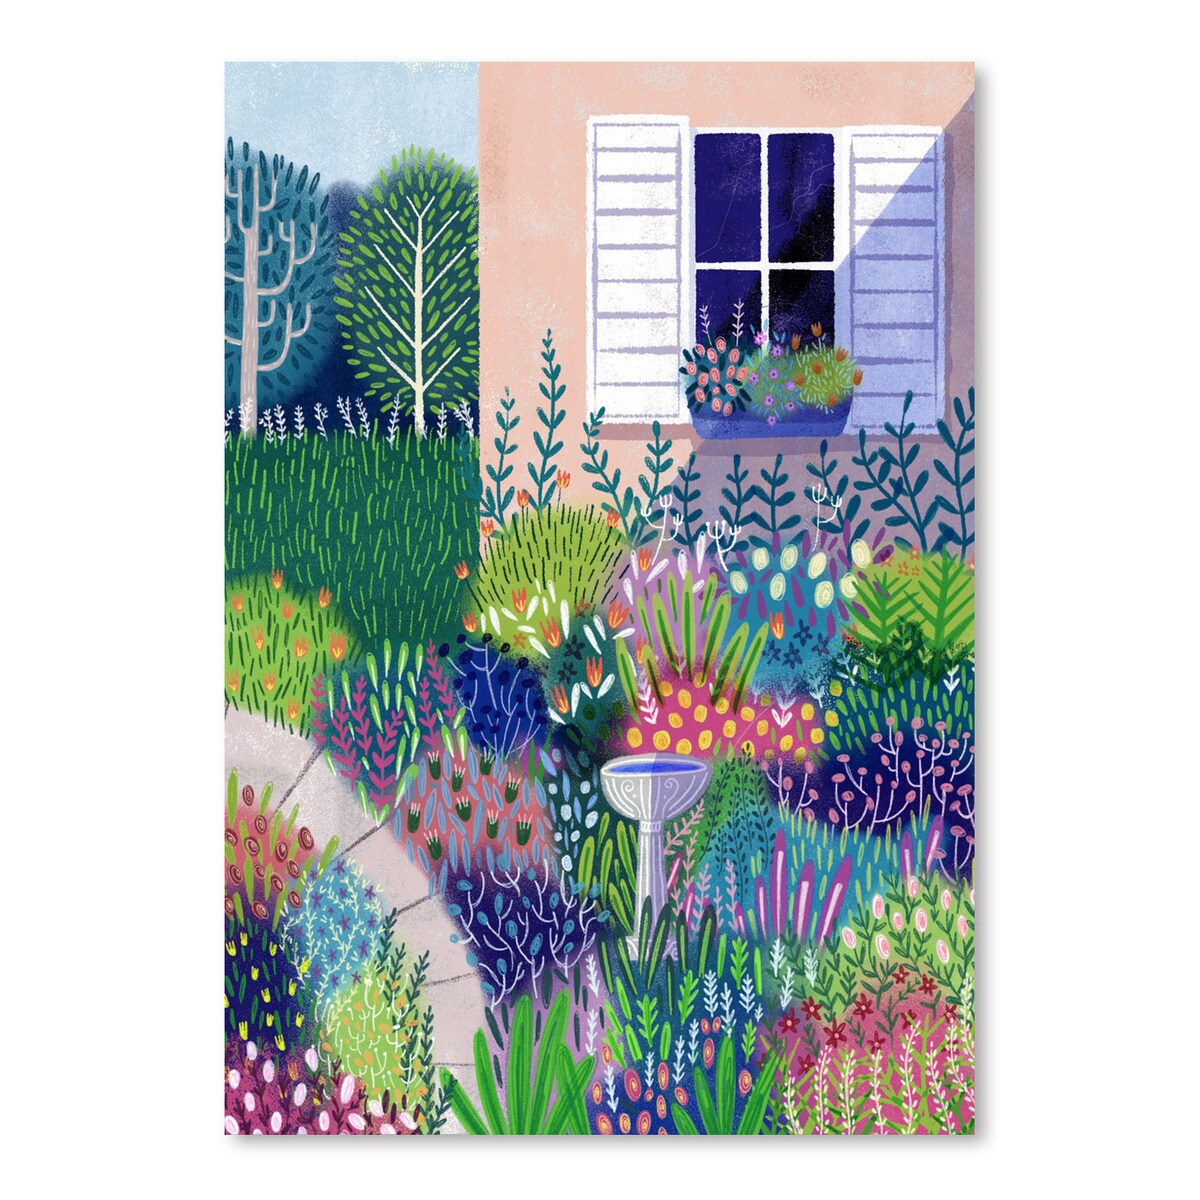 Spring Has Sprung by Jean Claude  Poster Art Print - Americanflat